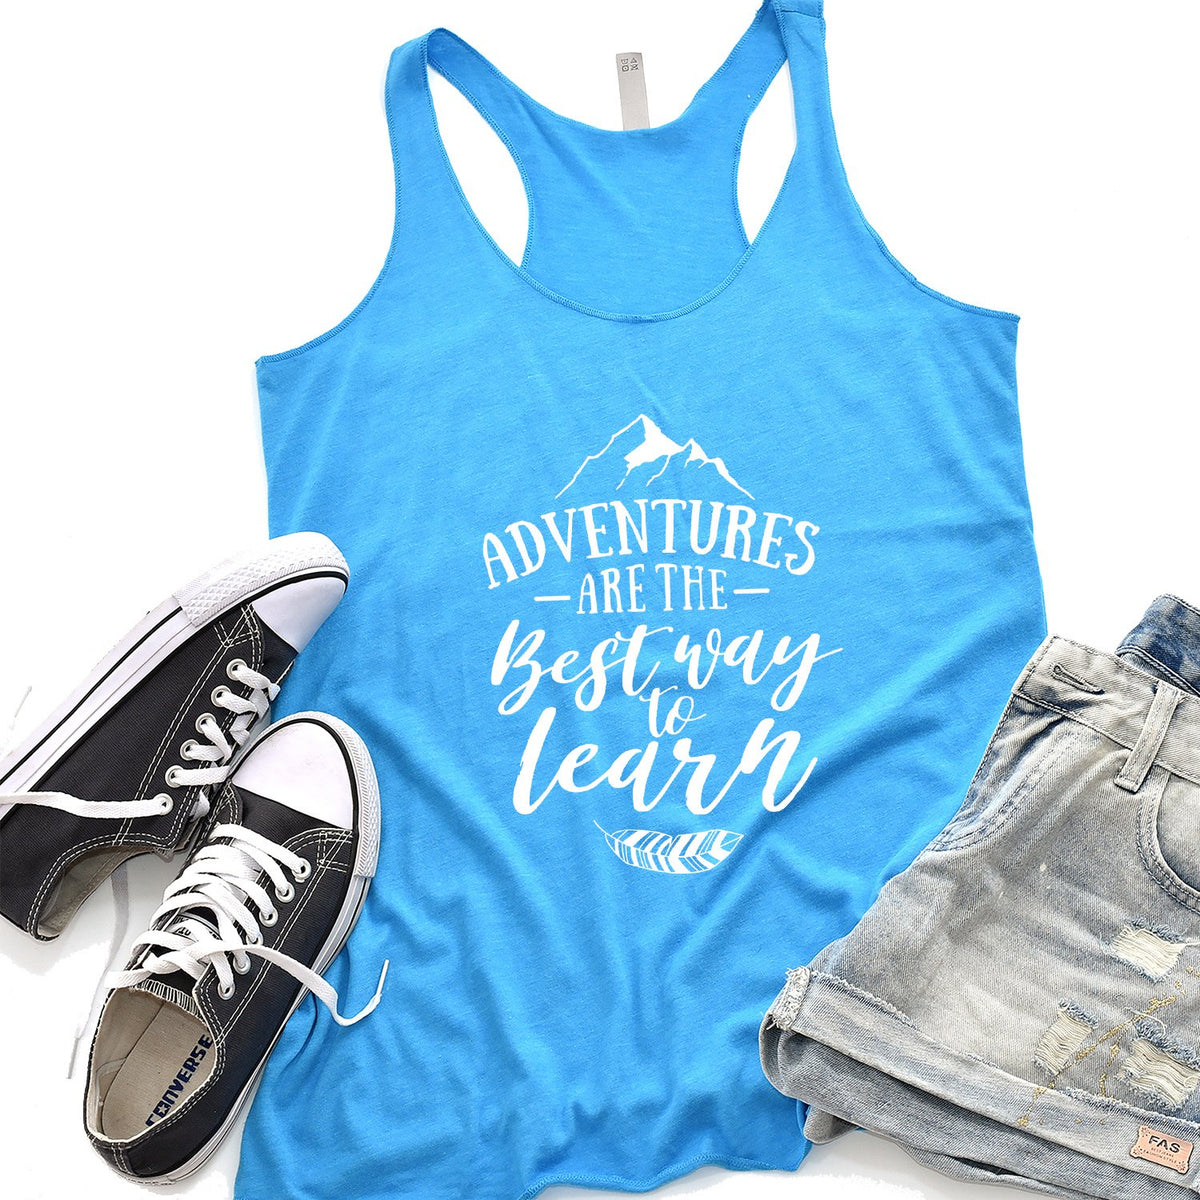 Adventures Are The Best Way to Learn - Tank Top Racerback